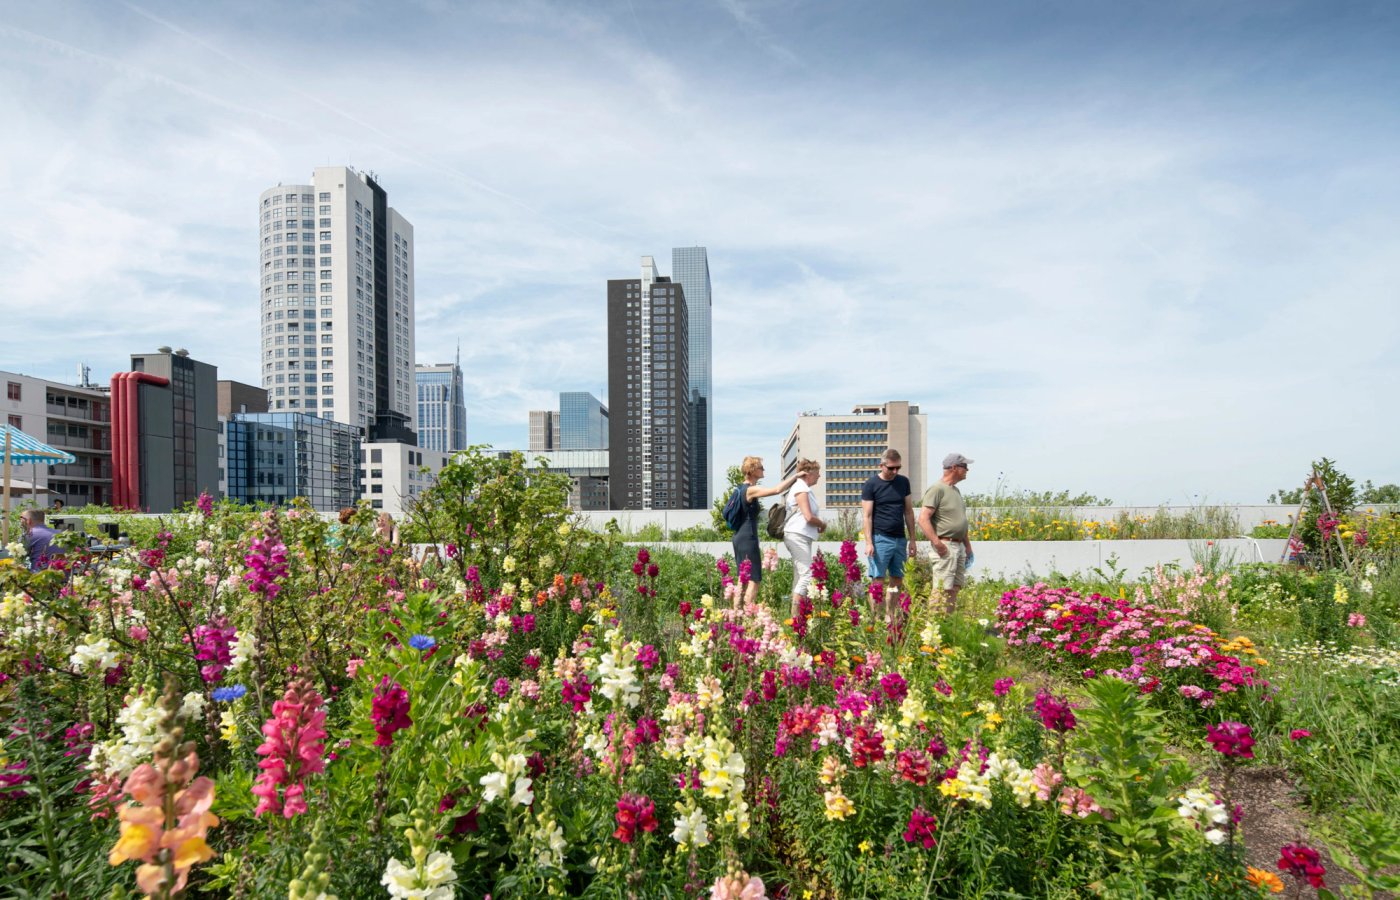 The number of green roofs is increasing in the city; what is so specifically Rotterdam about that?